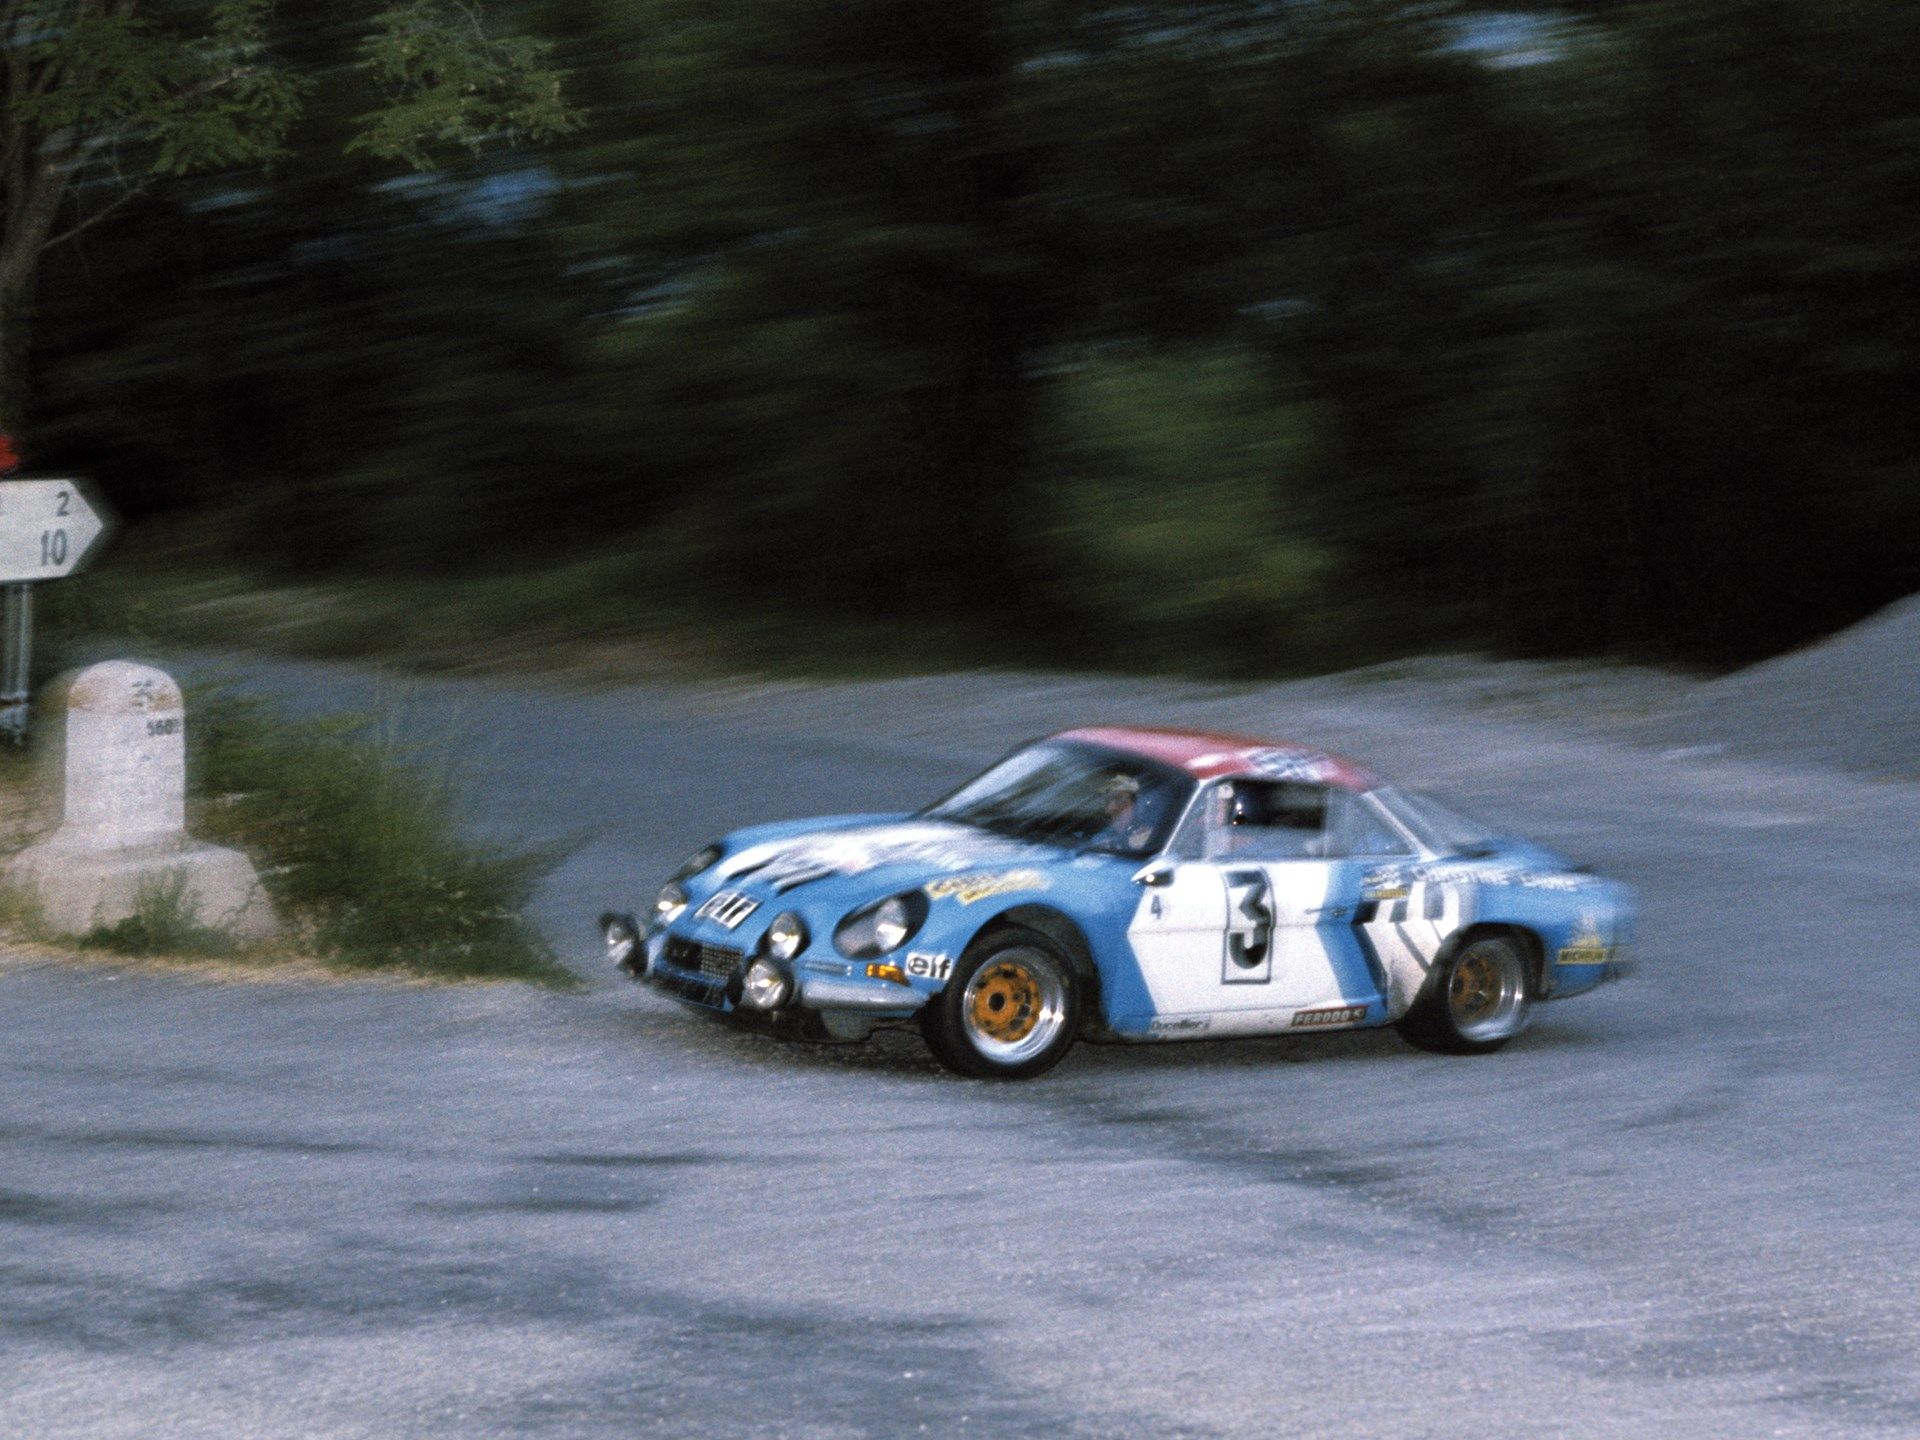 1974 Renault Alpine A110 1800 Group 4 Works